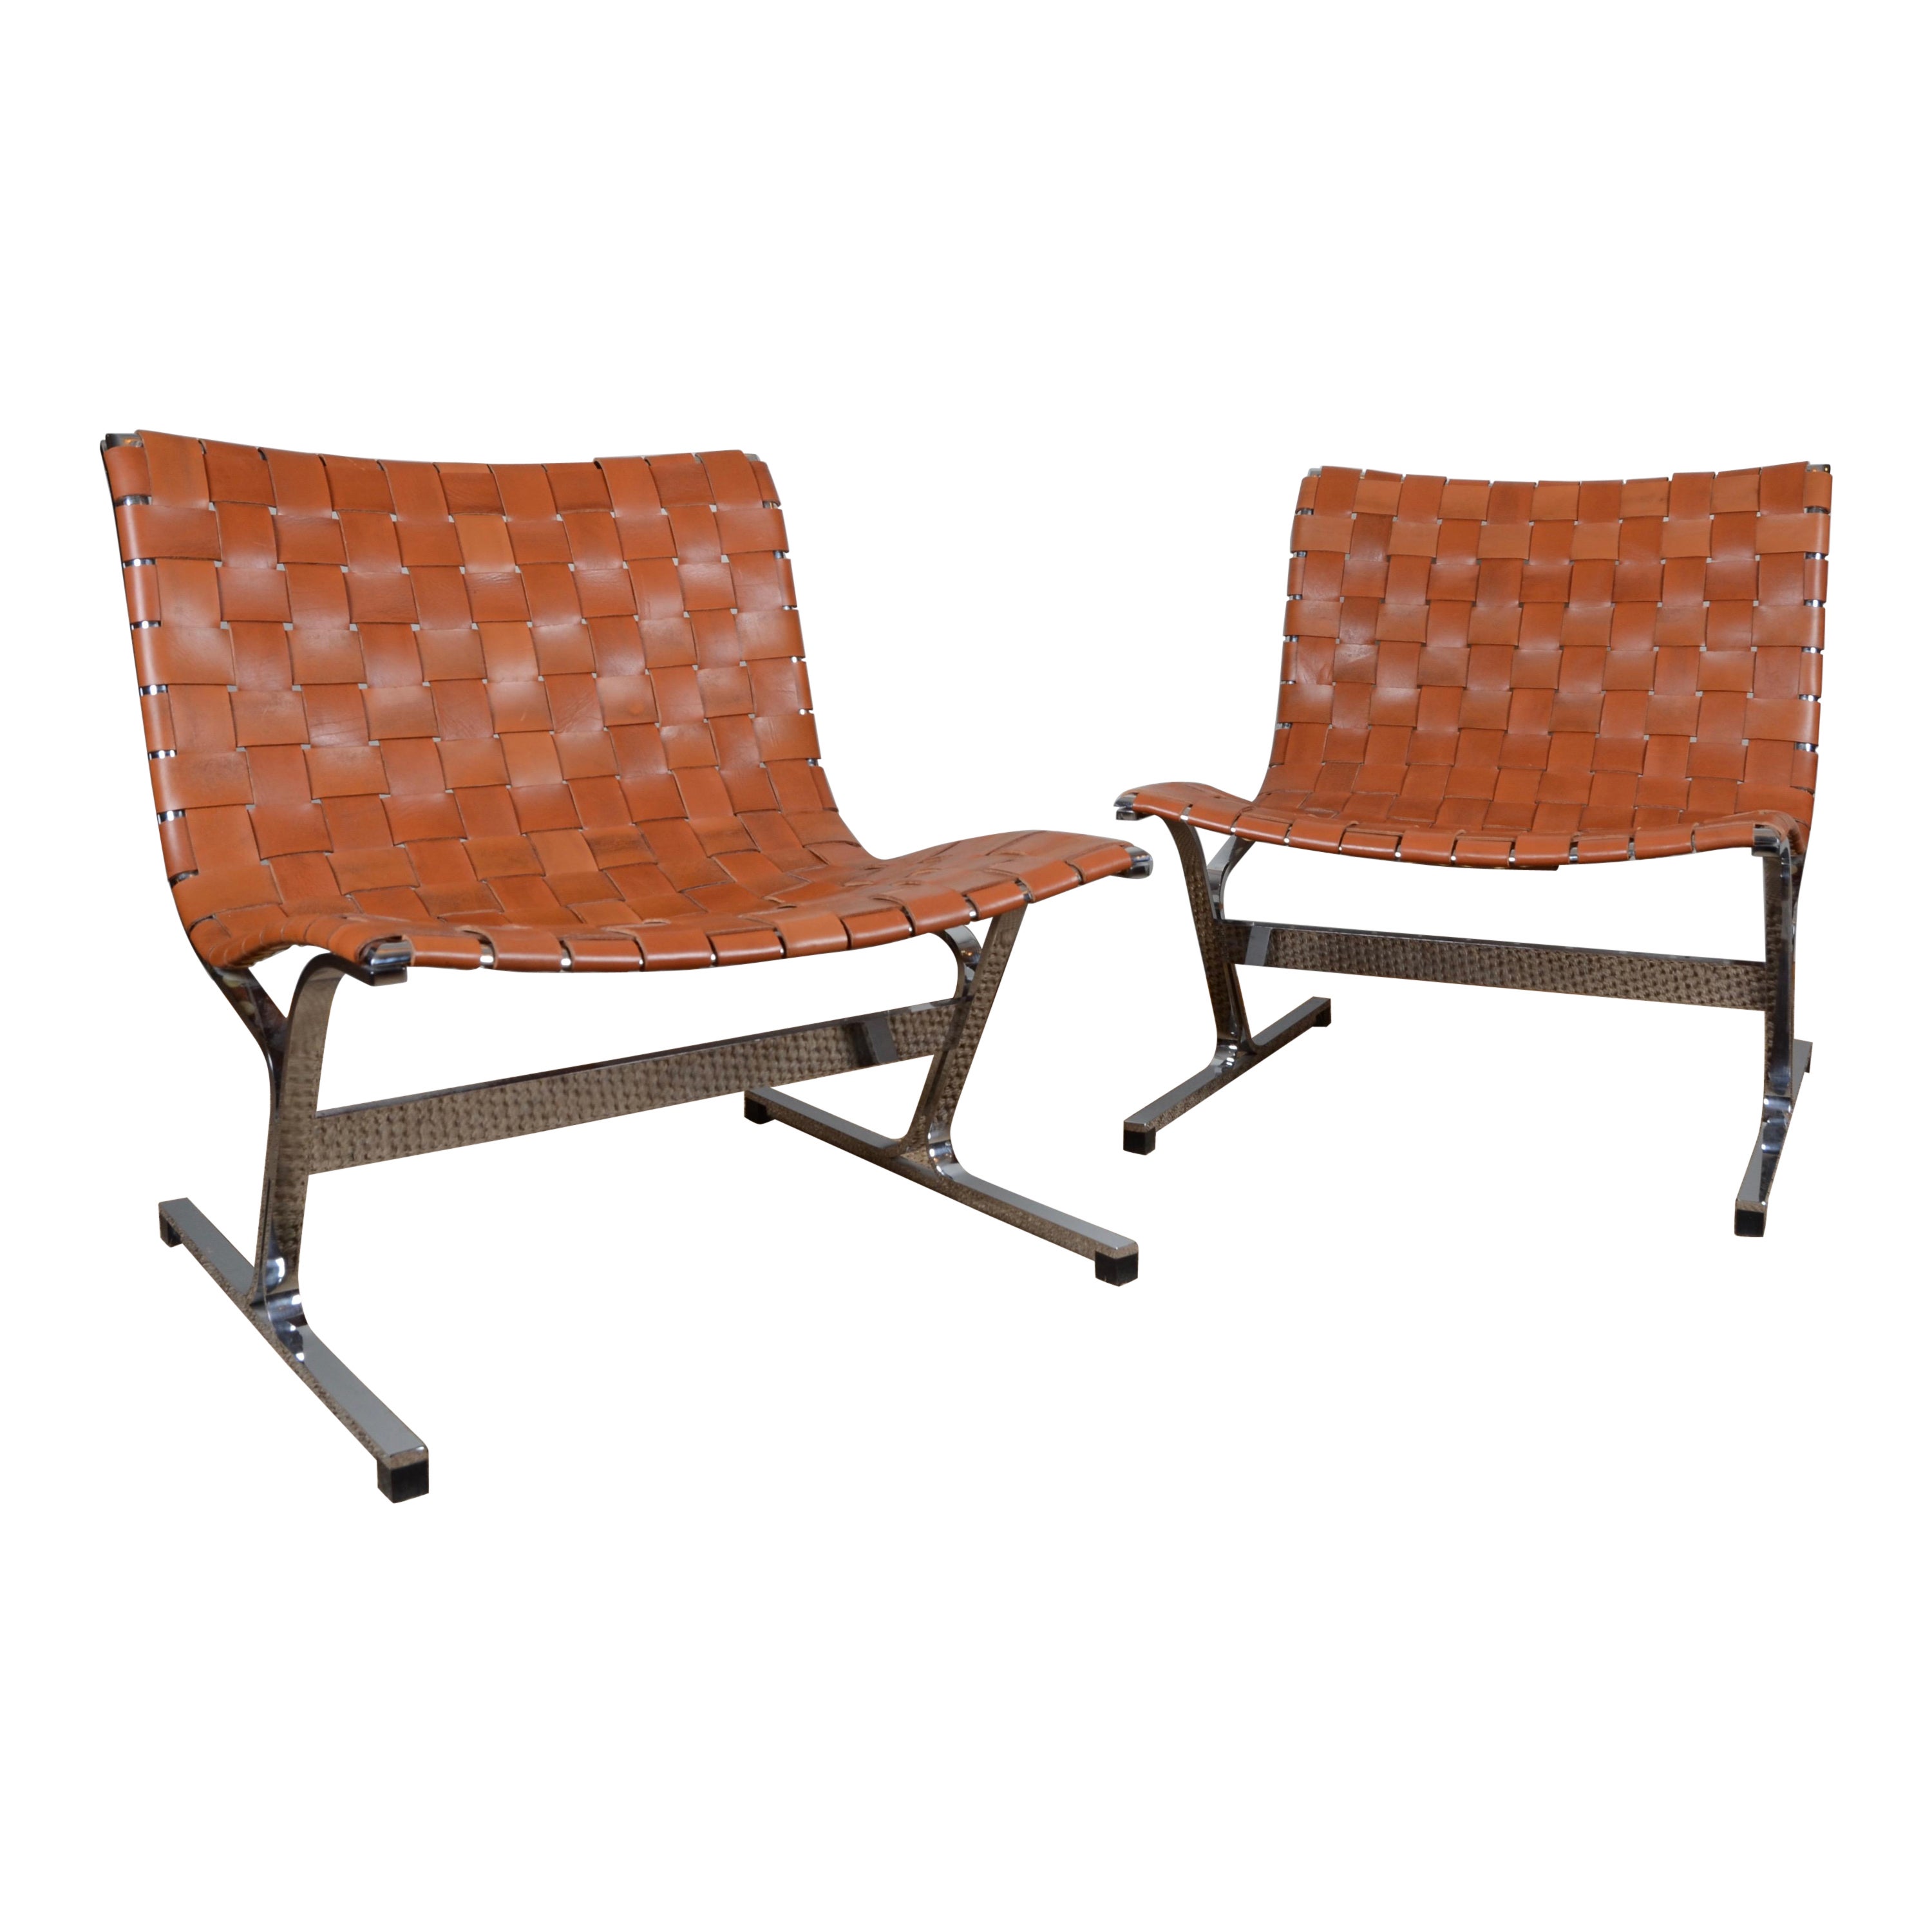 Ross Littell, a Pair of PLR-1 Chairs, ICF Italy, 1960s